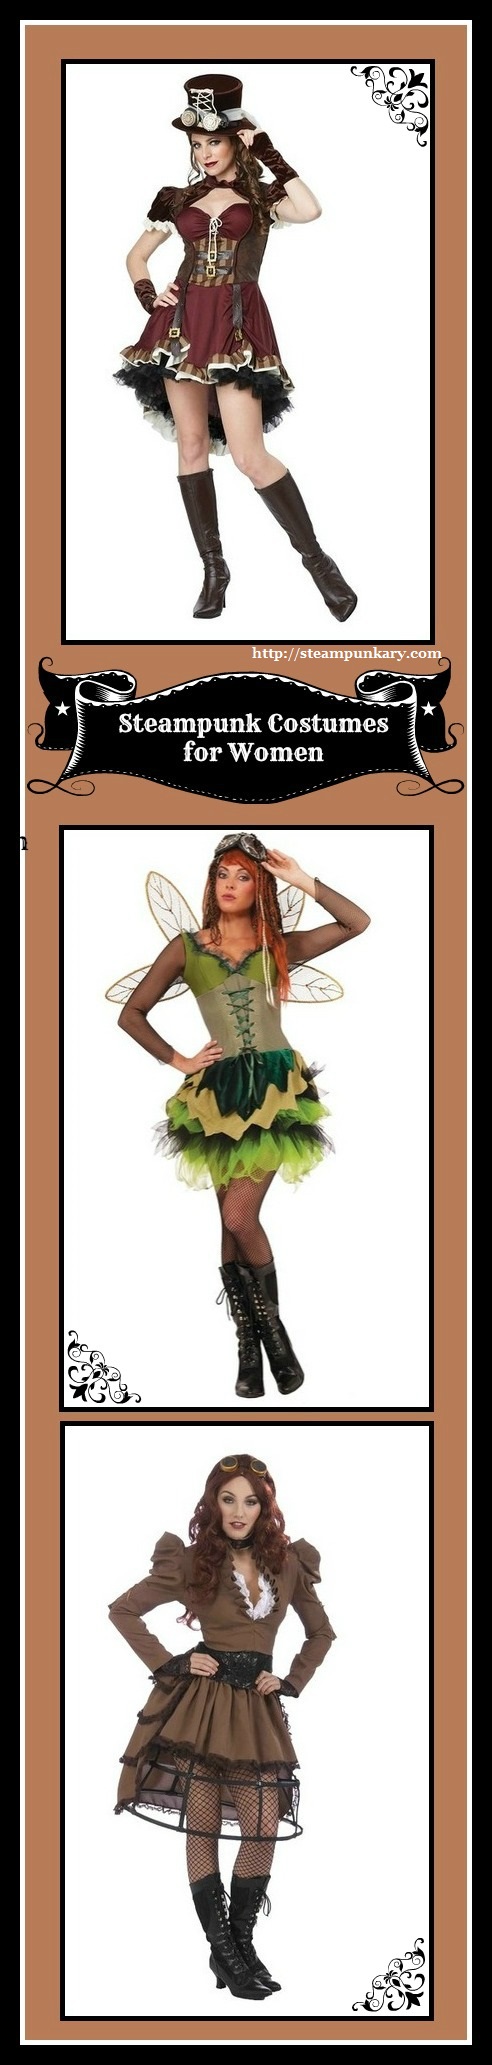 Steampunk costumes for women